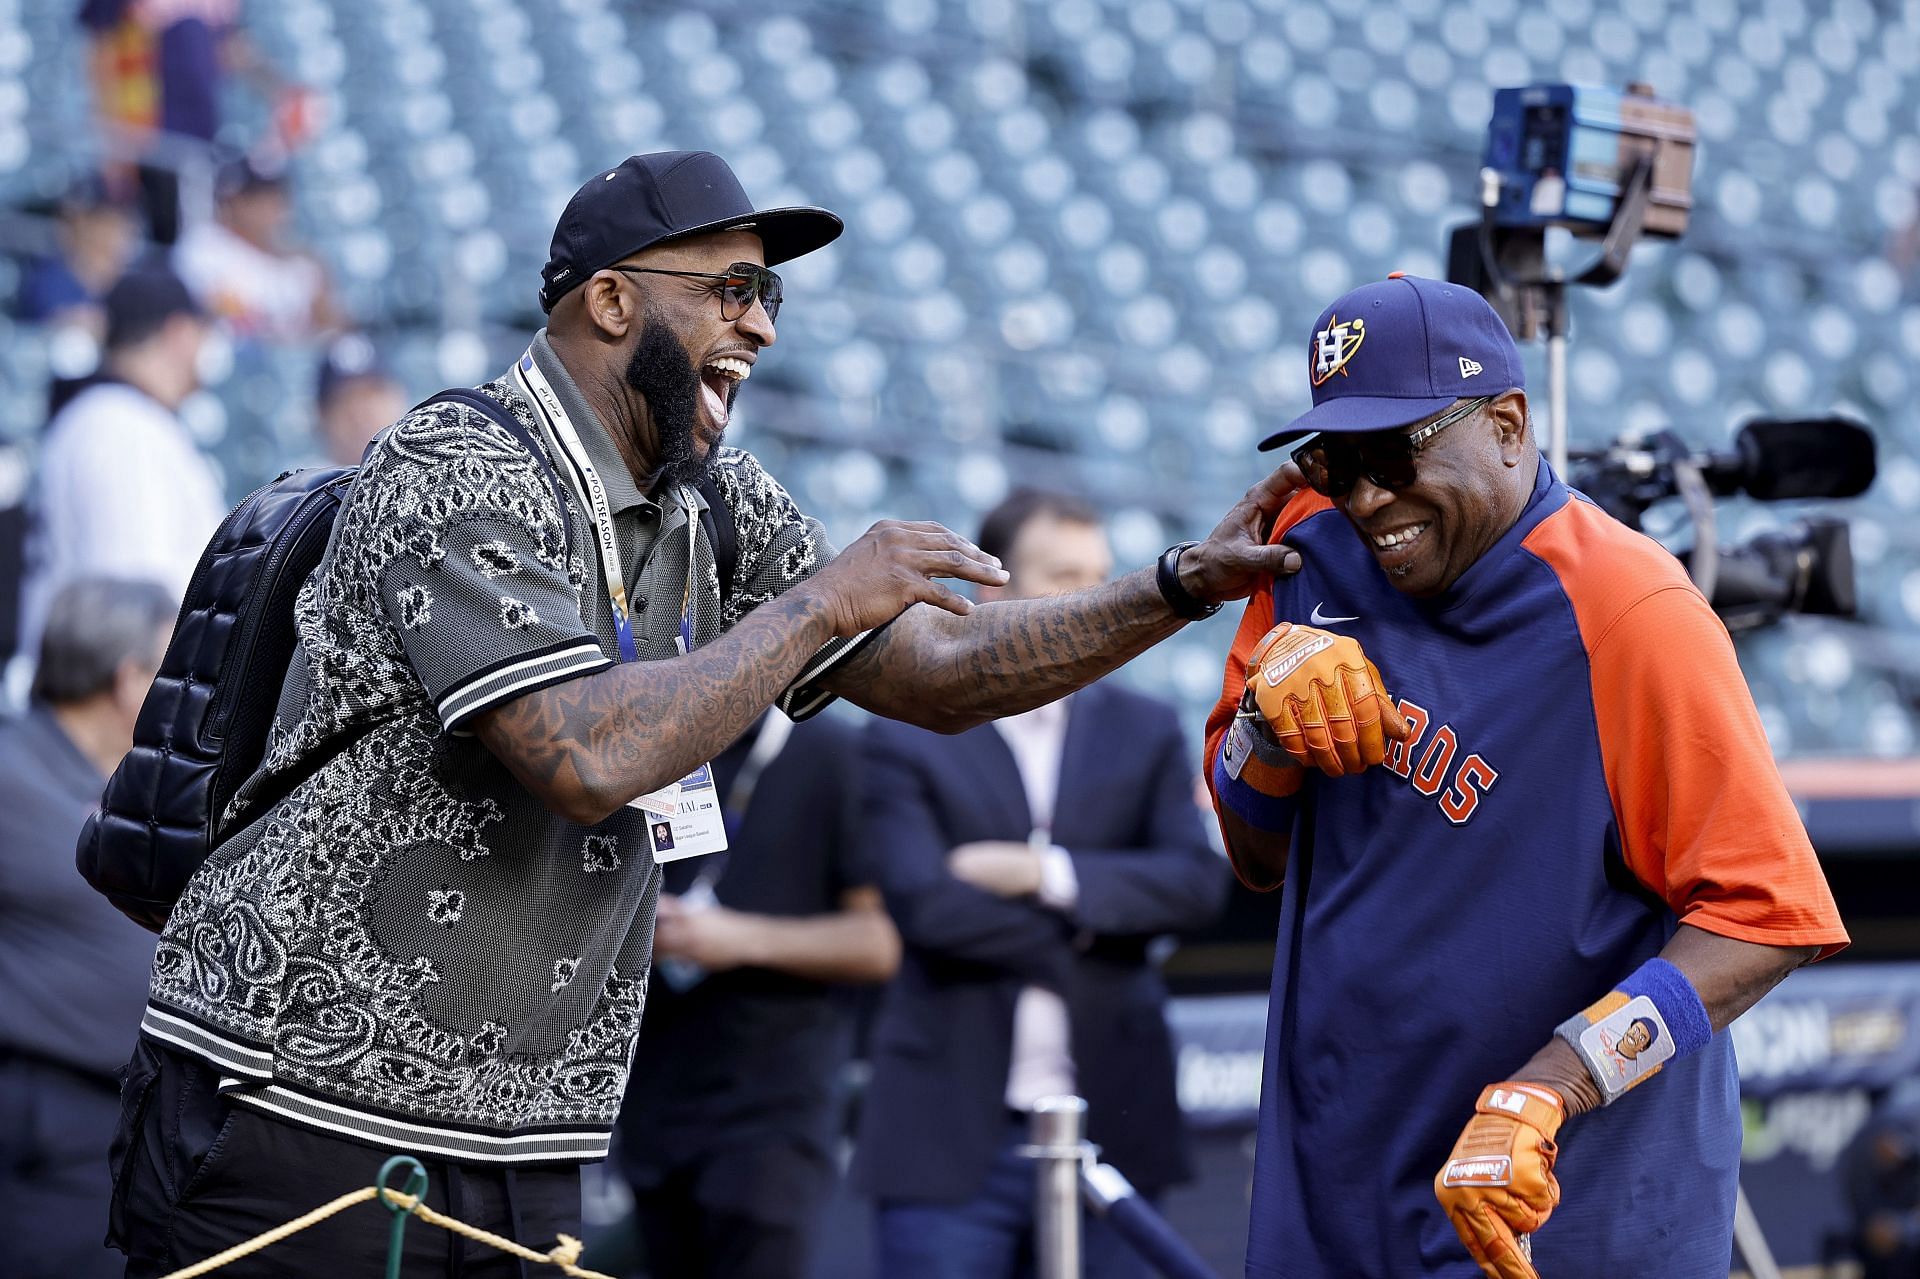 Former New York Yankees pitcher CC Sabathia says he doesn't have a